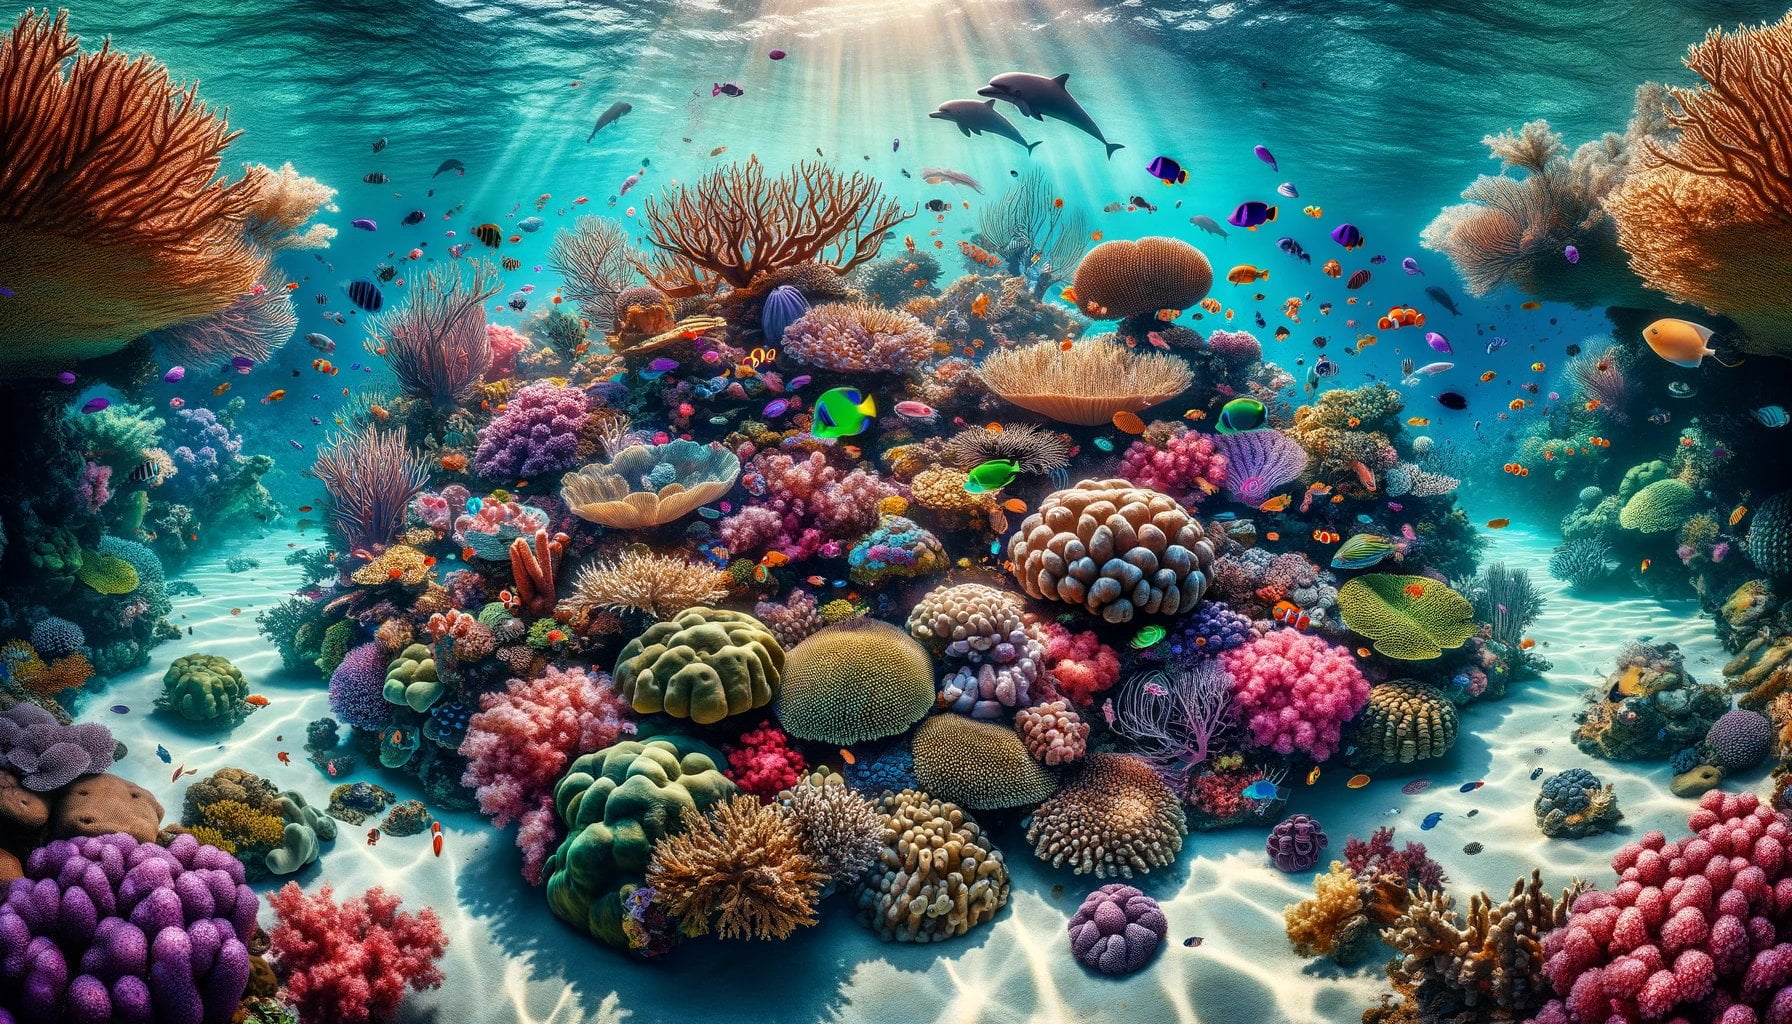 10 interesting facts about coral reefs 1